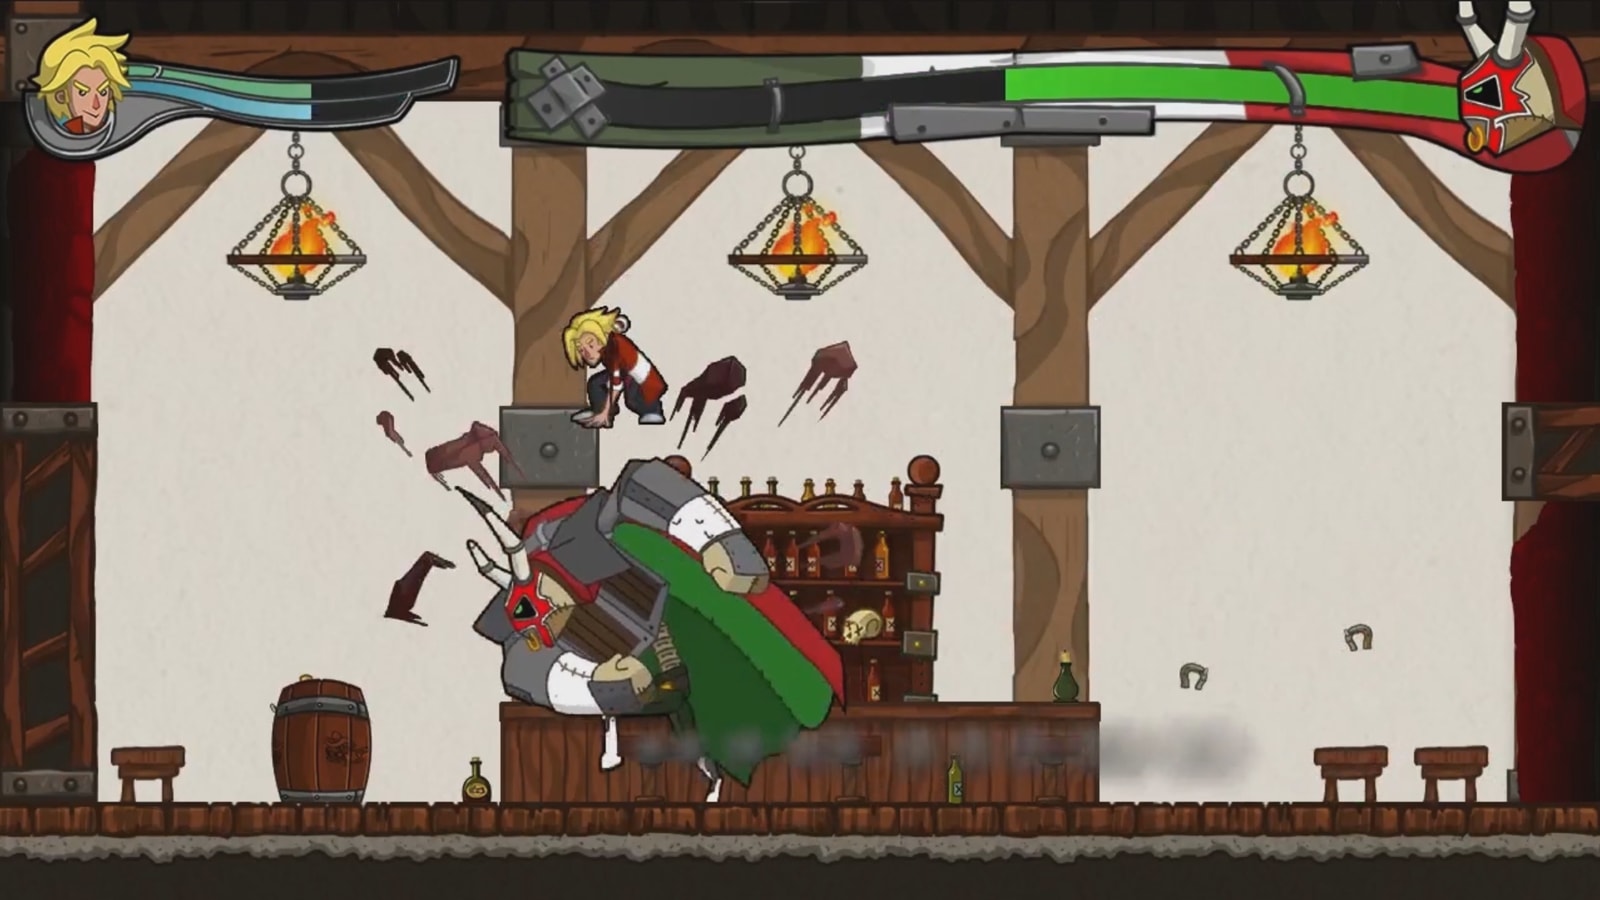 Jero leaps above a charging knight wearing a horned mask in a pub. 